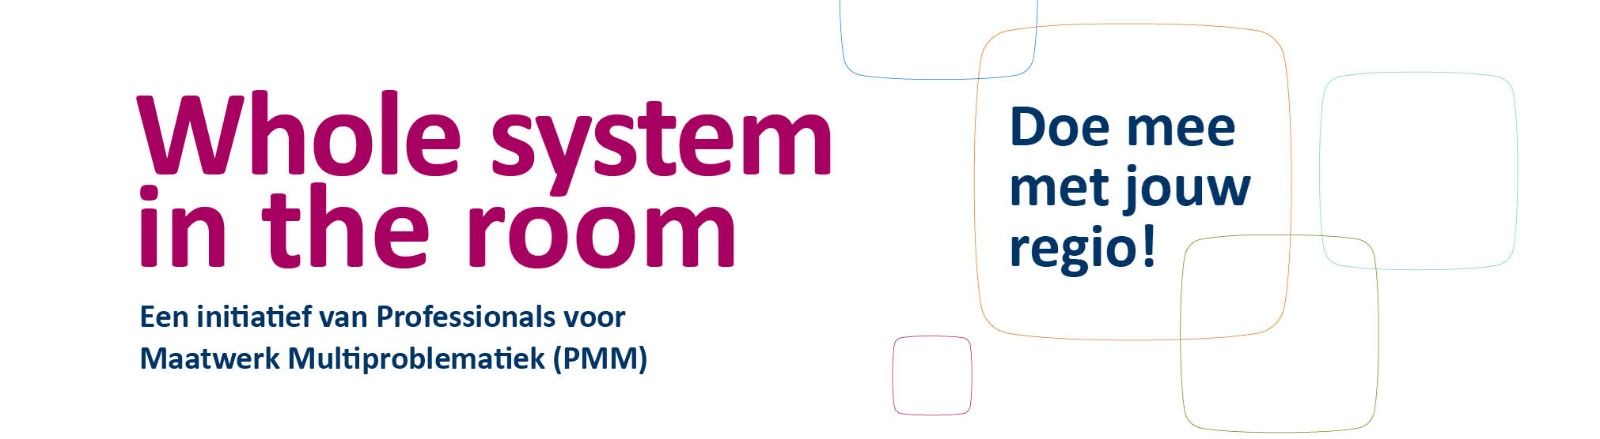 Banner de Whole system in the room